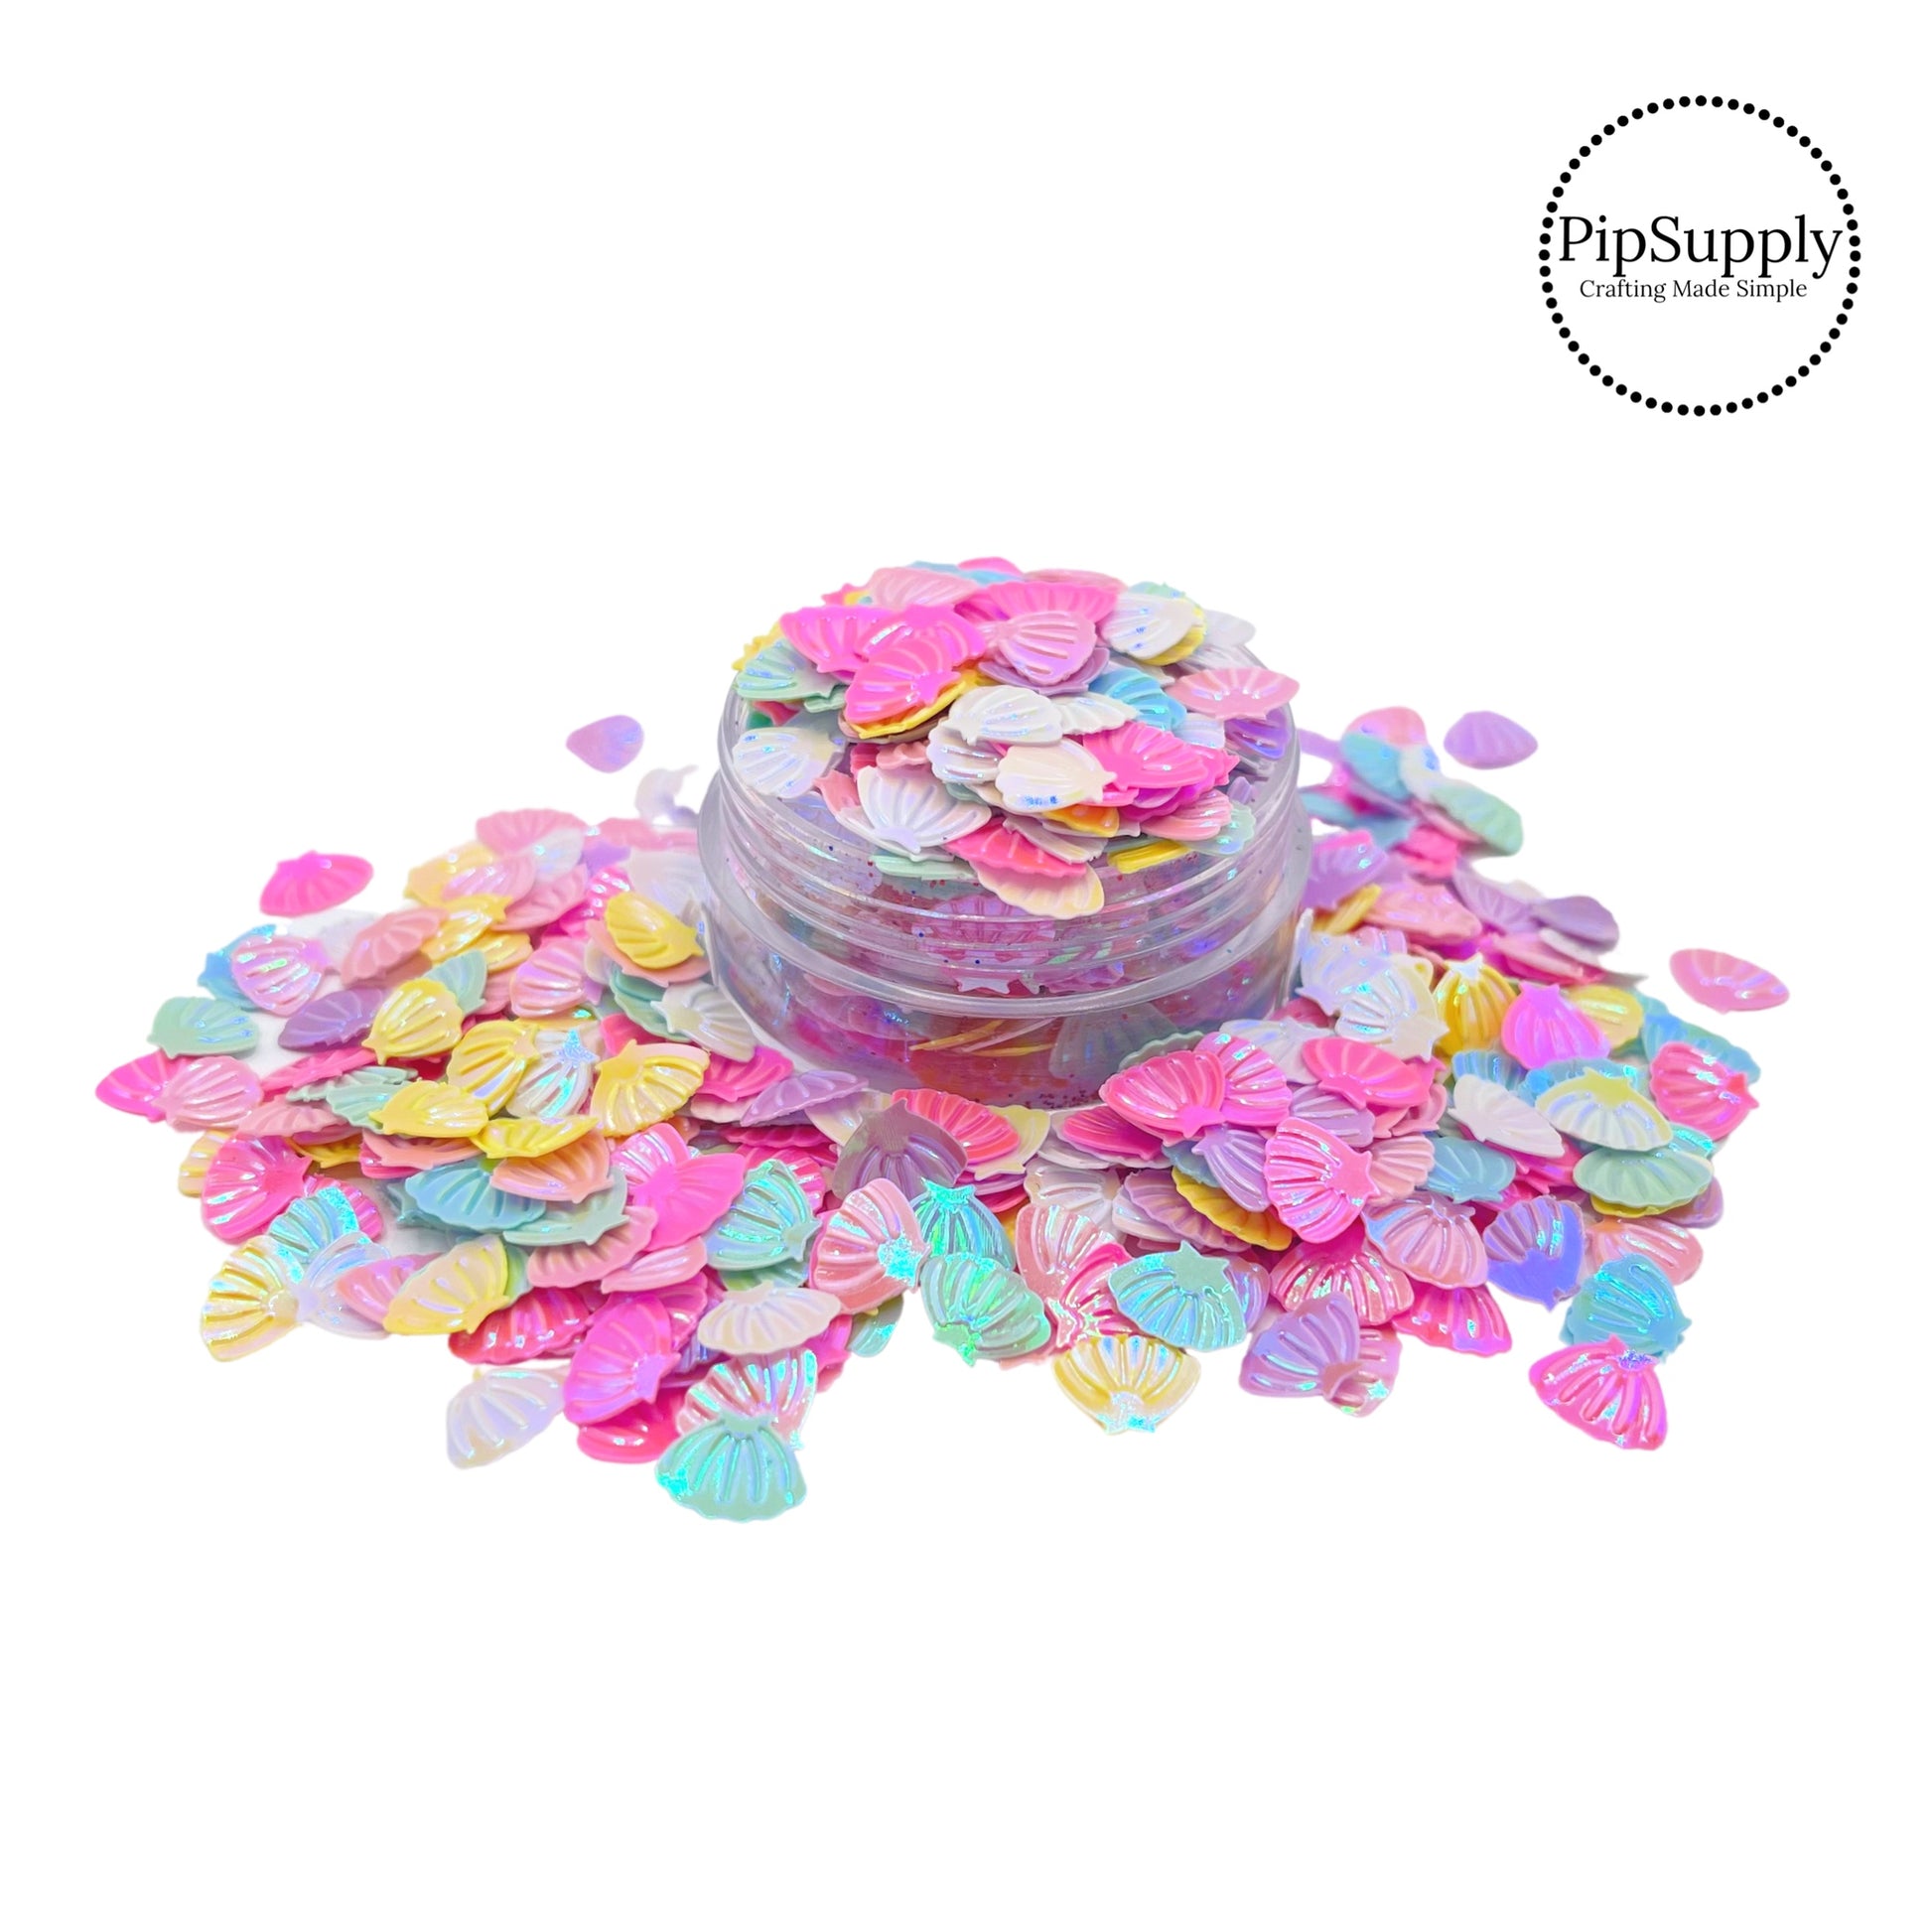 Pastel pink, purple, blue, green, and yellow seashell sequin glitter